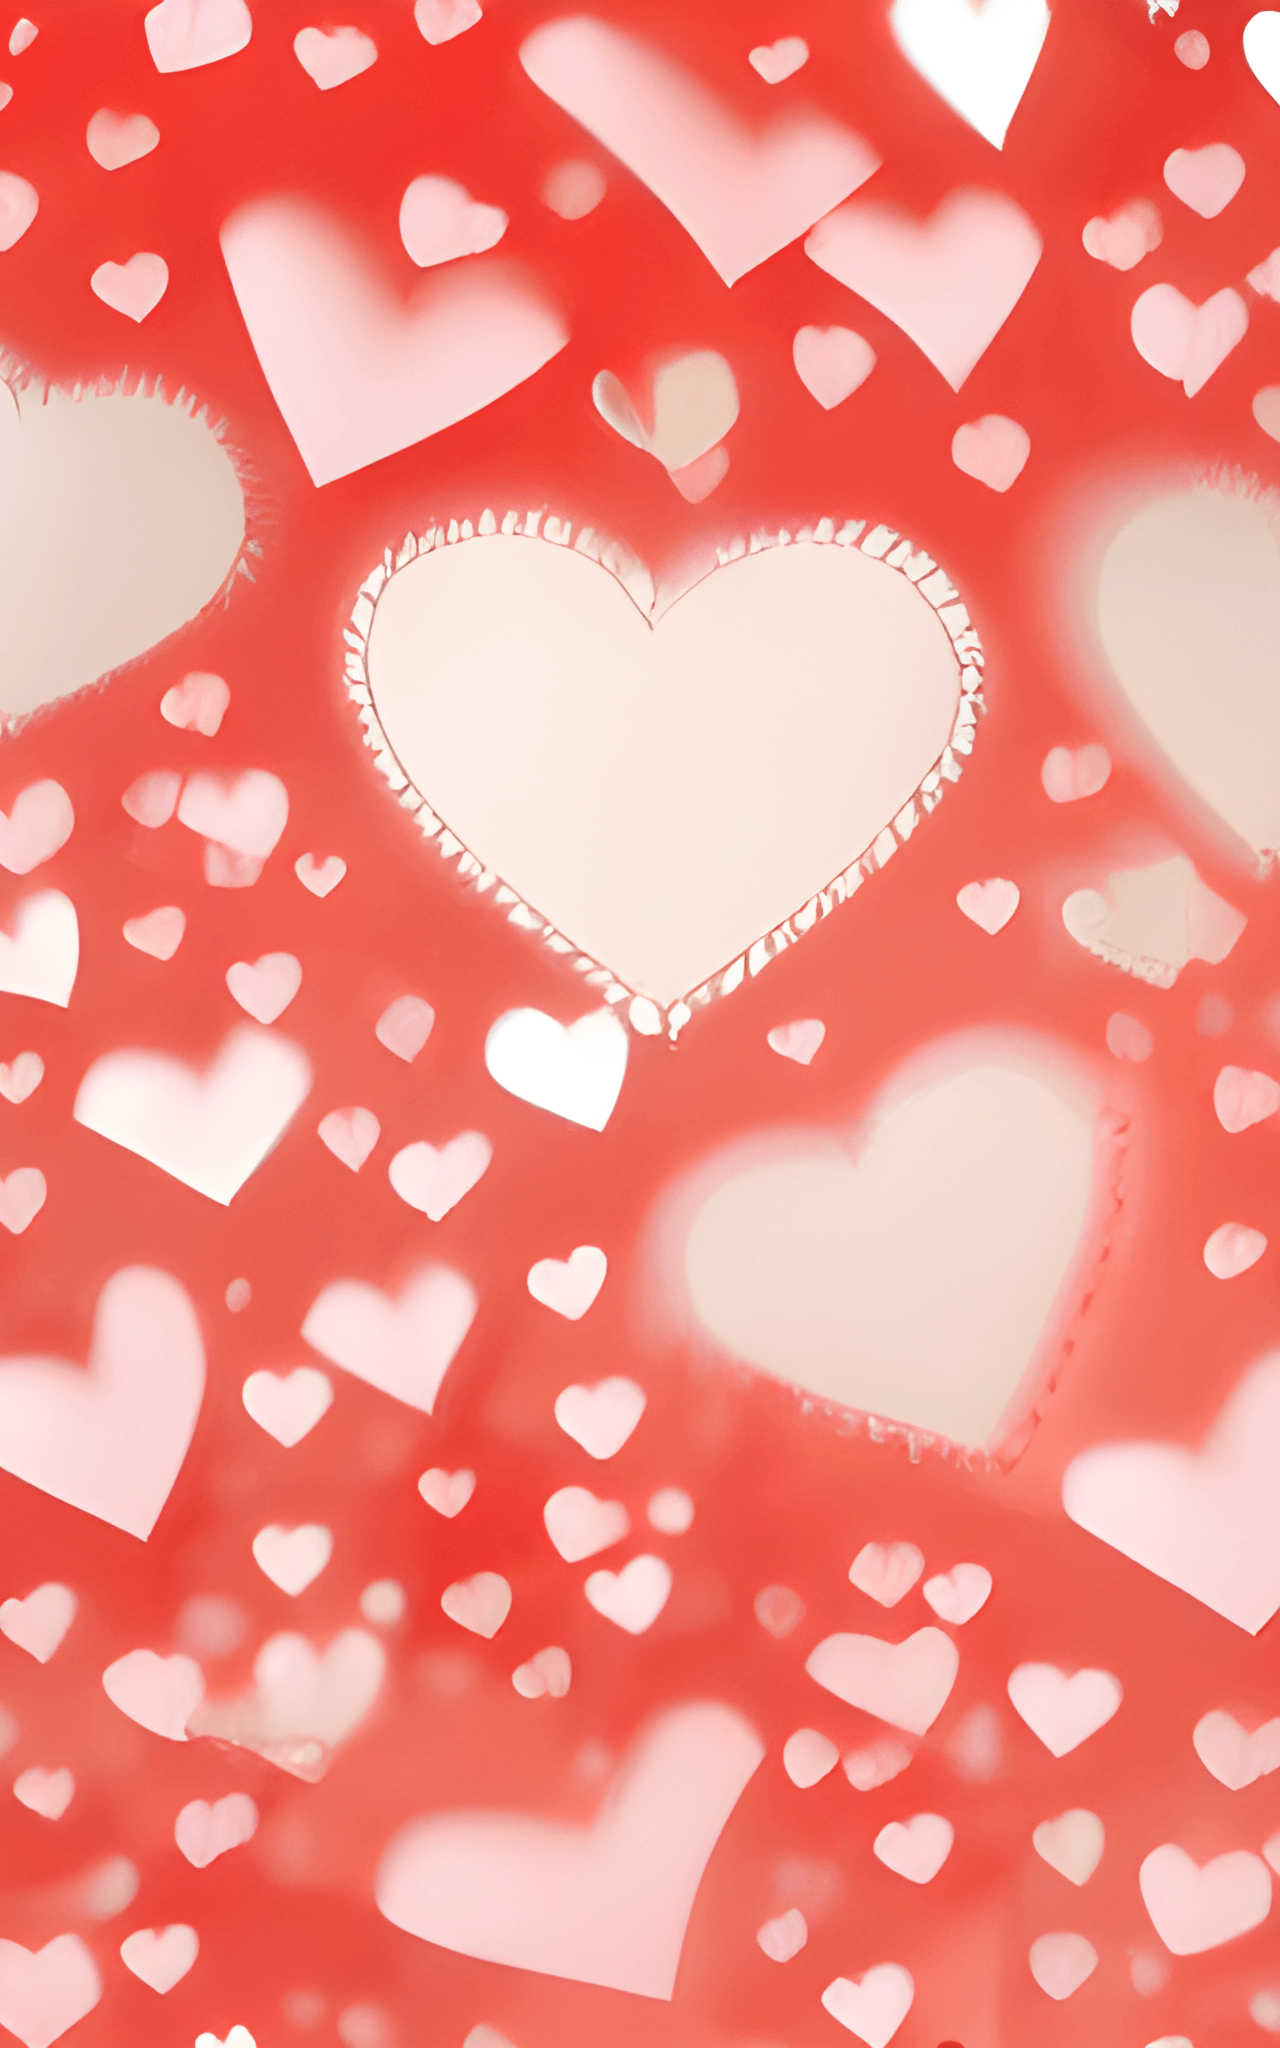 Red background with white hearts - Heart